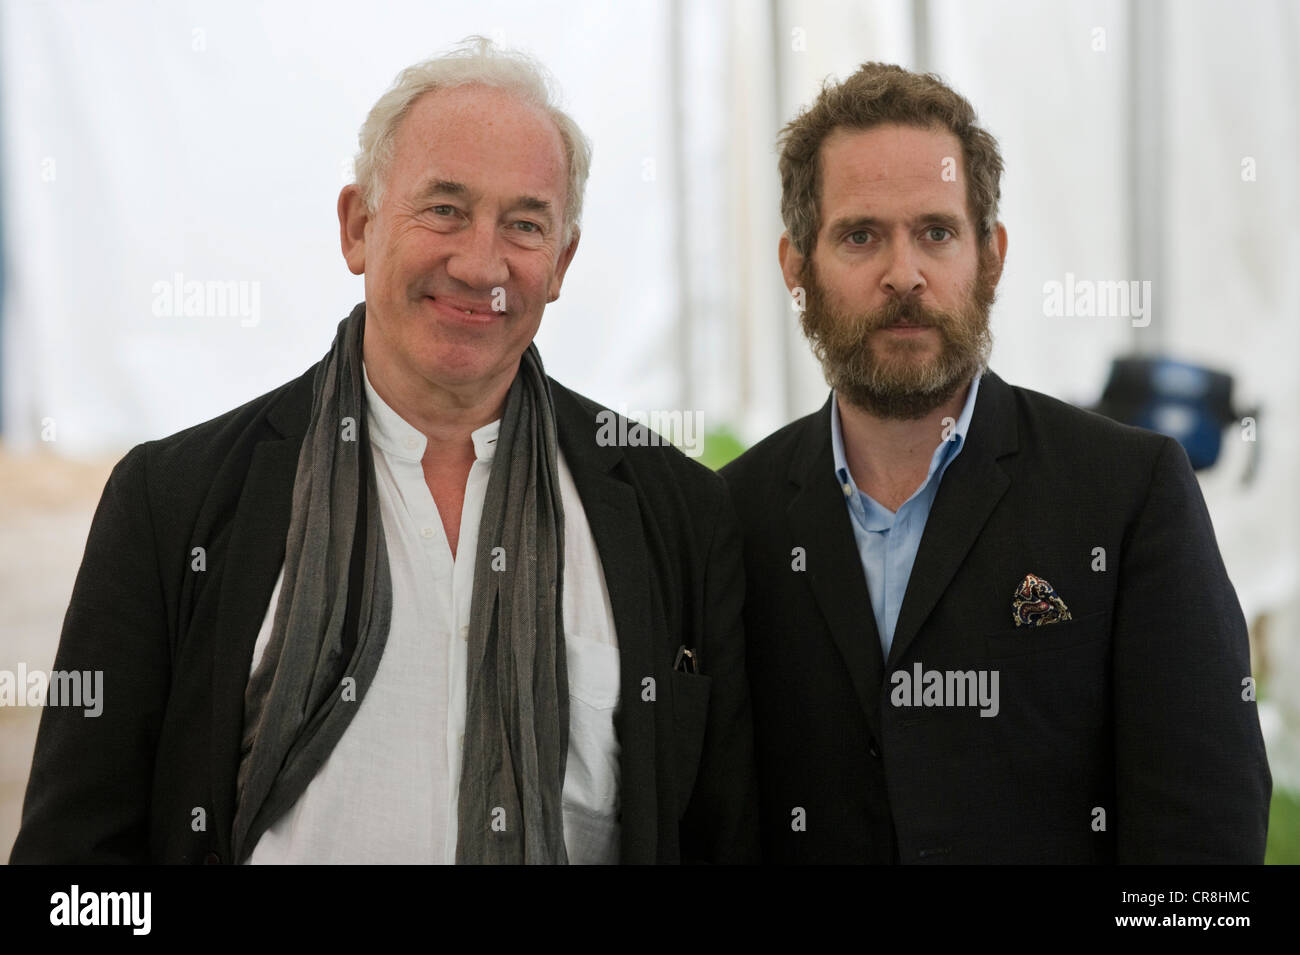 Simon Callow & Tom Hollander, British actors pictured at The Telegraph Hay Festival 2012, Hay-on-Wye, Powys, Wales, UK Stock Photo